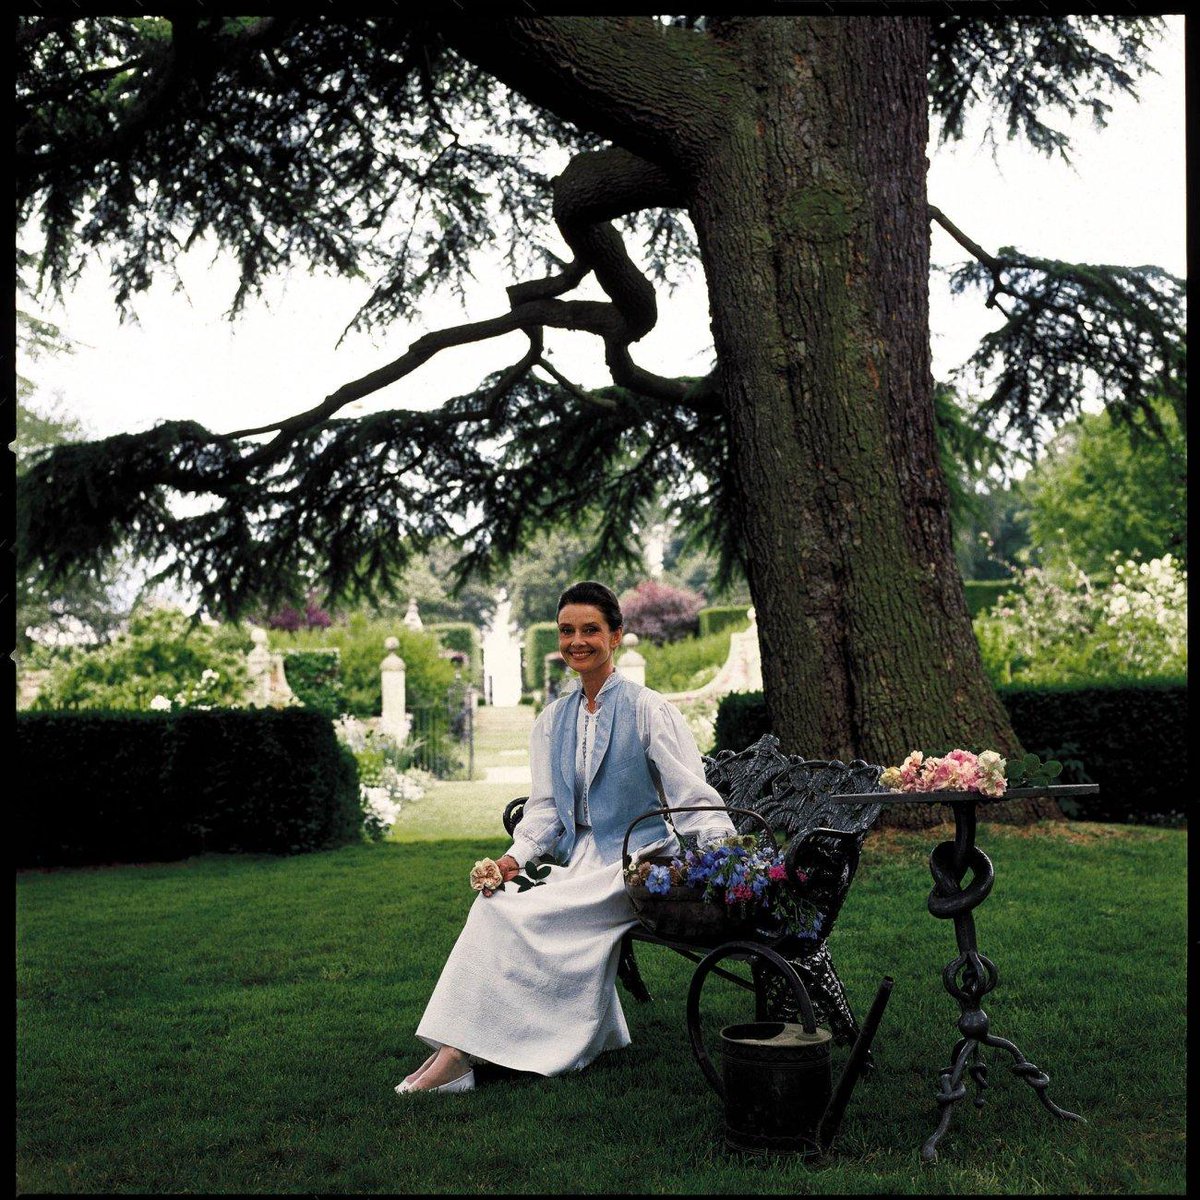 Happy #EarthDay! 🌍 Audrey Hepburn photographed filming Gardens of the World at the Hidcote Manor Gardens, England, 1990